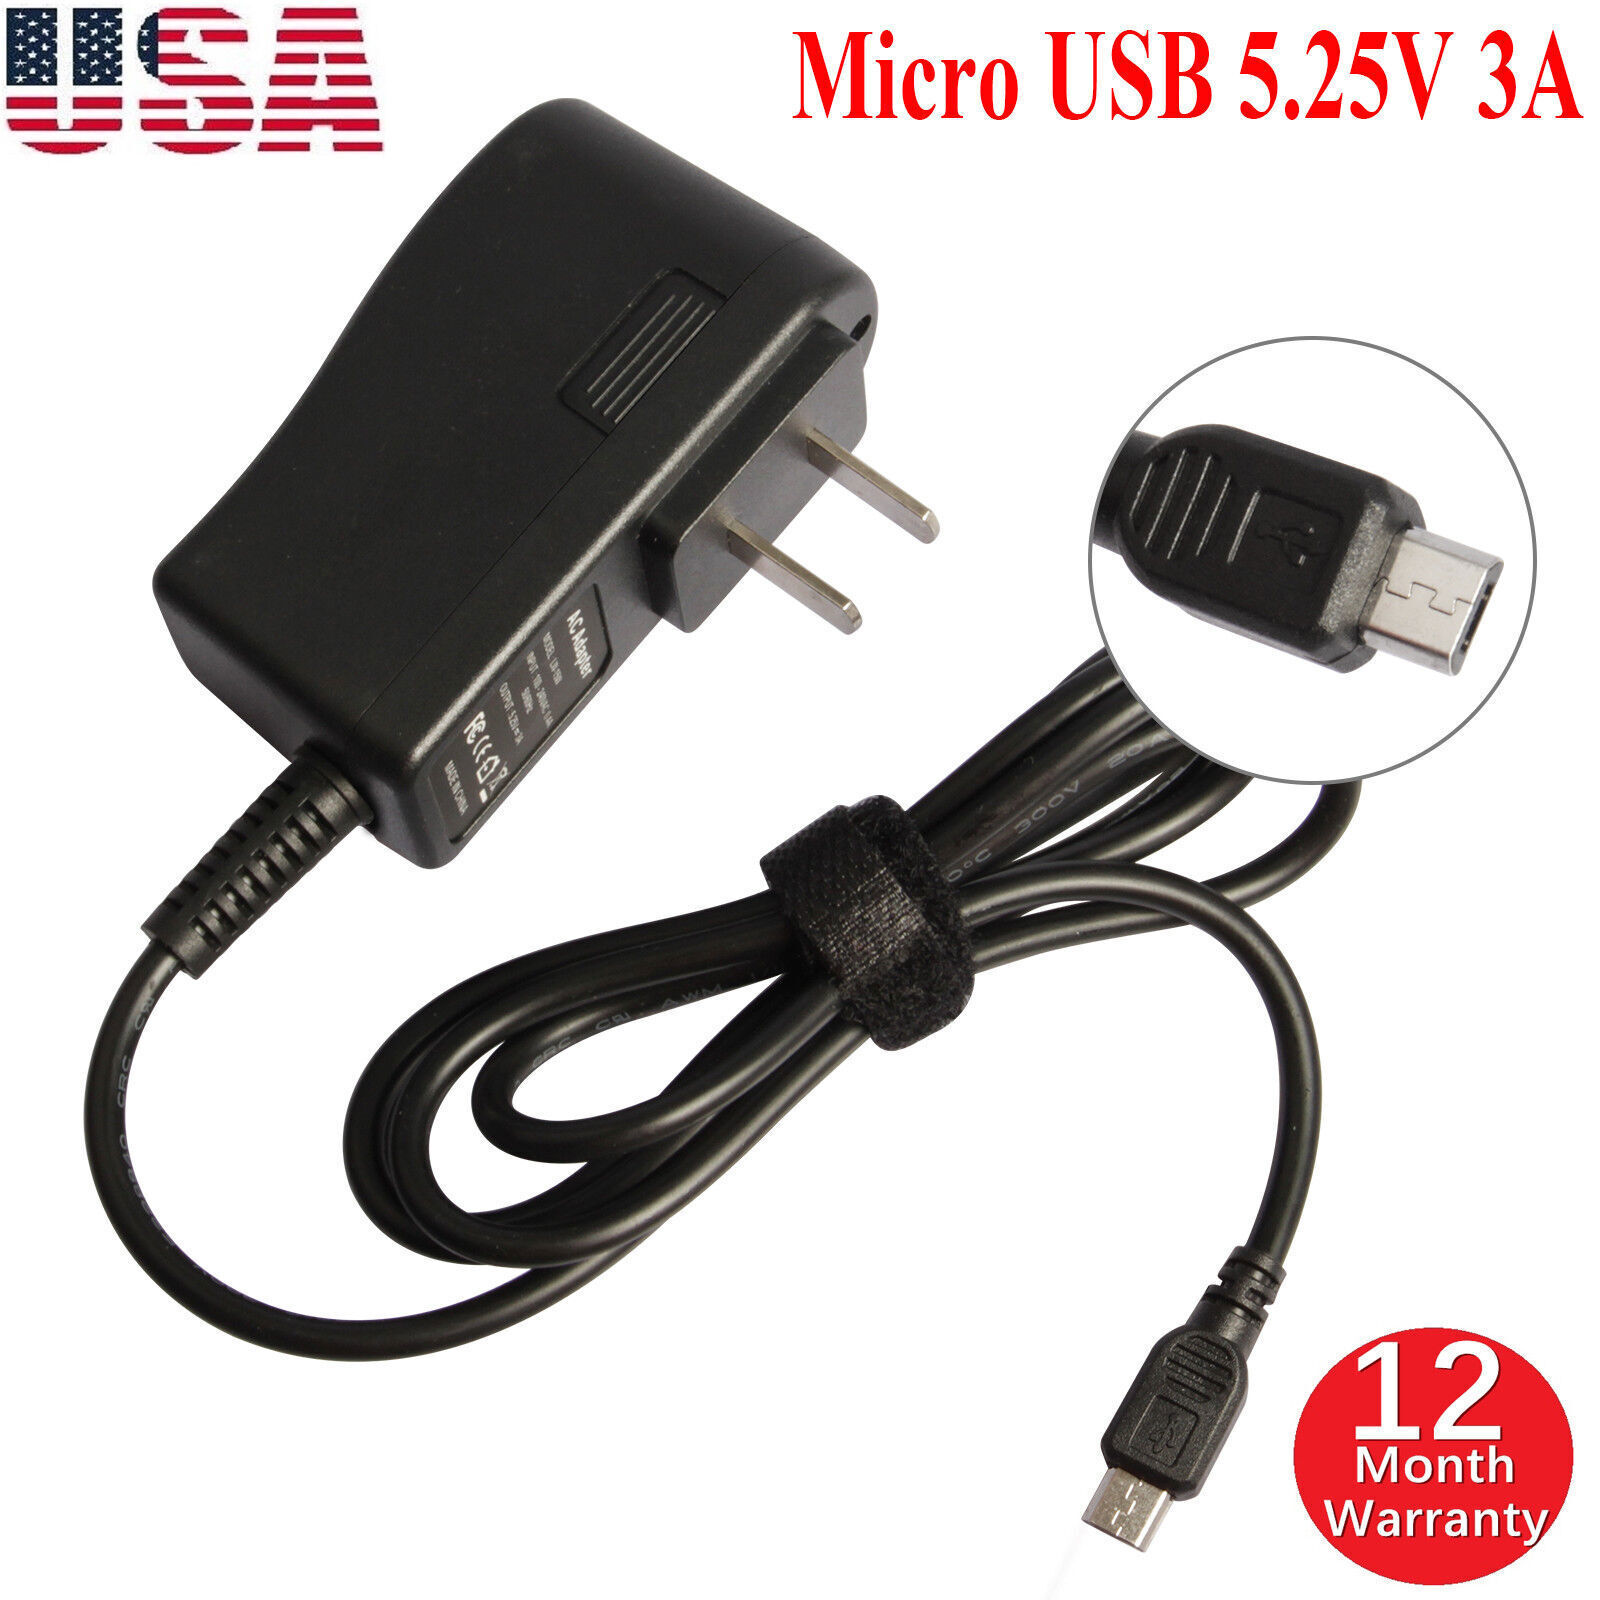 For HP GOOGLE Chromebook 11 G1 G2 Nikon D800E Adapter Charger Micro USB 5.25V 3A